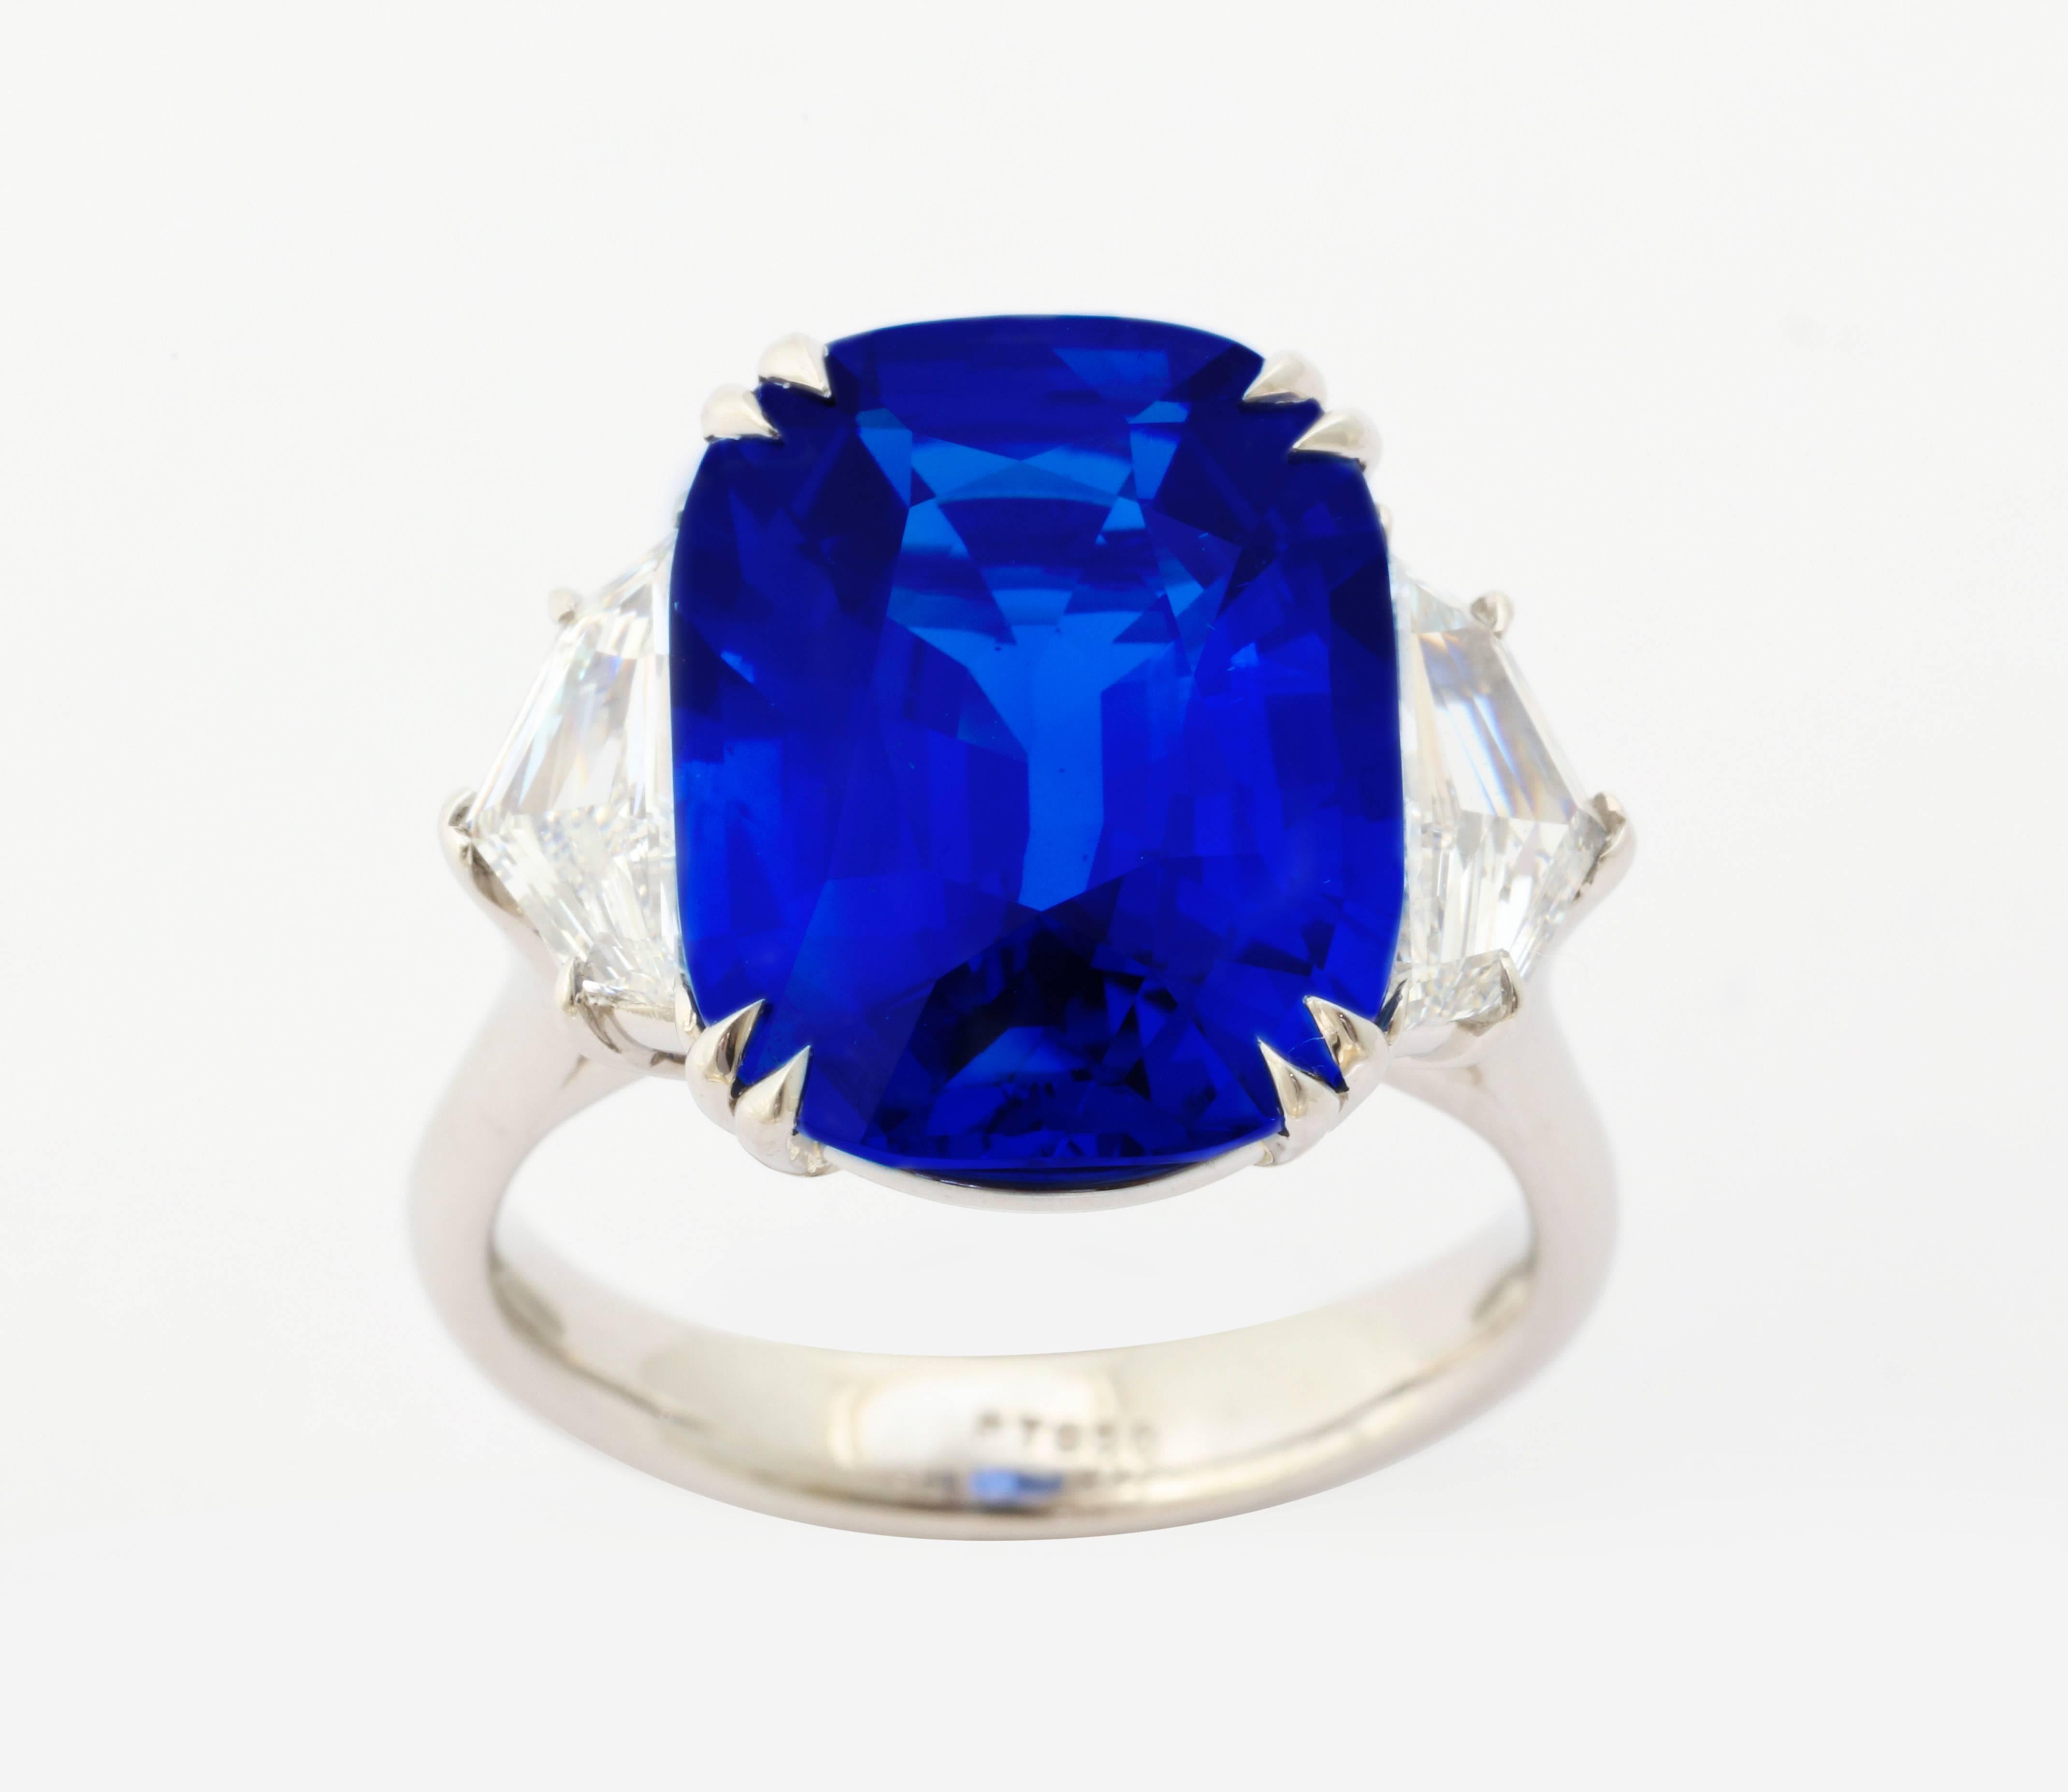 Only the very finest Burmese sapphires earn the distinction of 